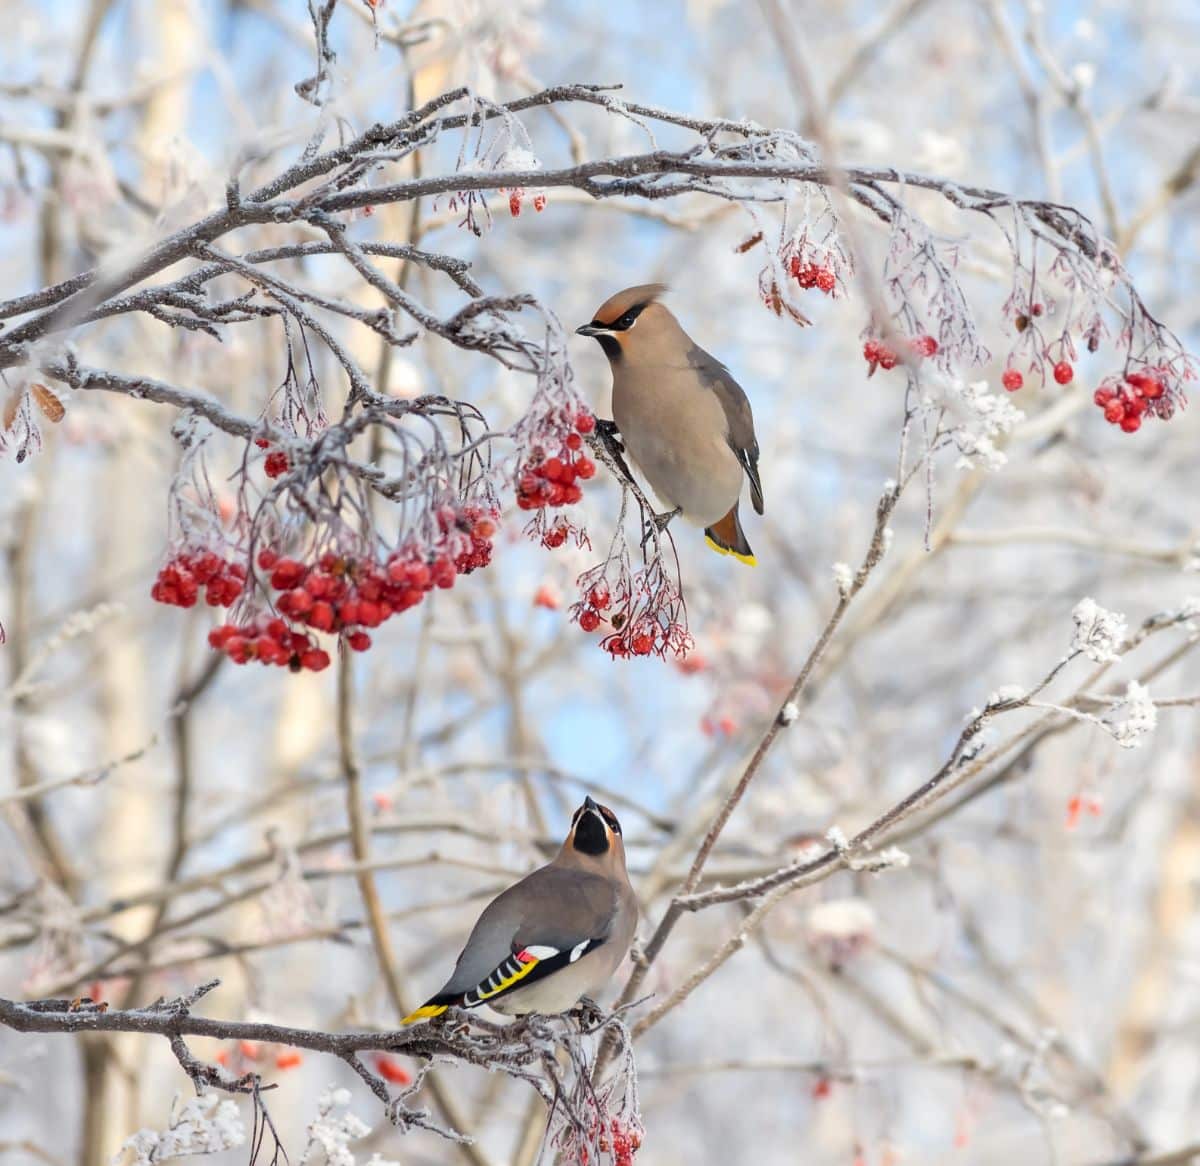 Cedar Waxwing birds sitting in a bush with frozen hips for eating